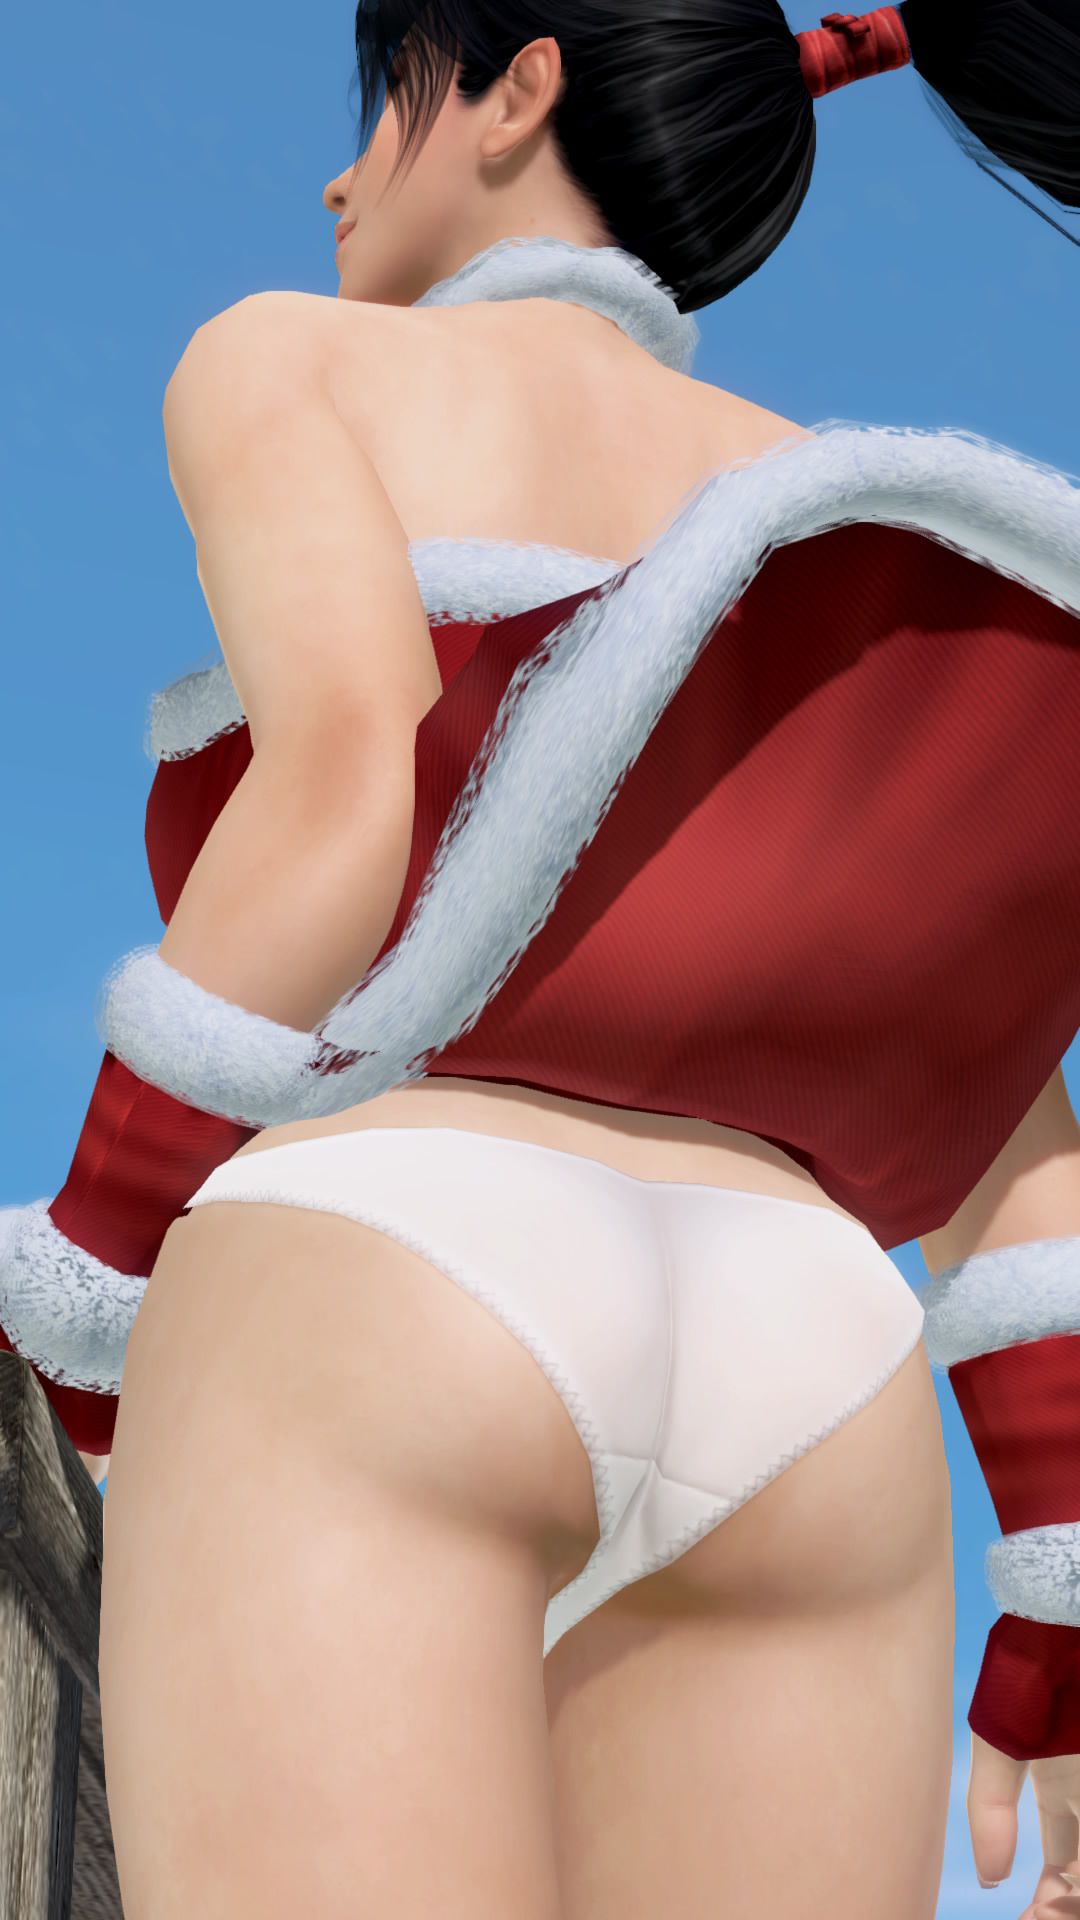 Merry Xmas from DOAX3 South Island! Photo session with new swimsuit Santa 9